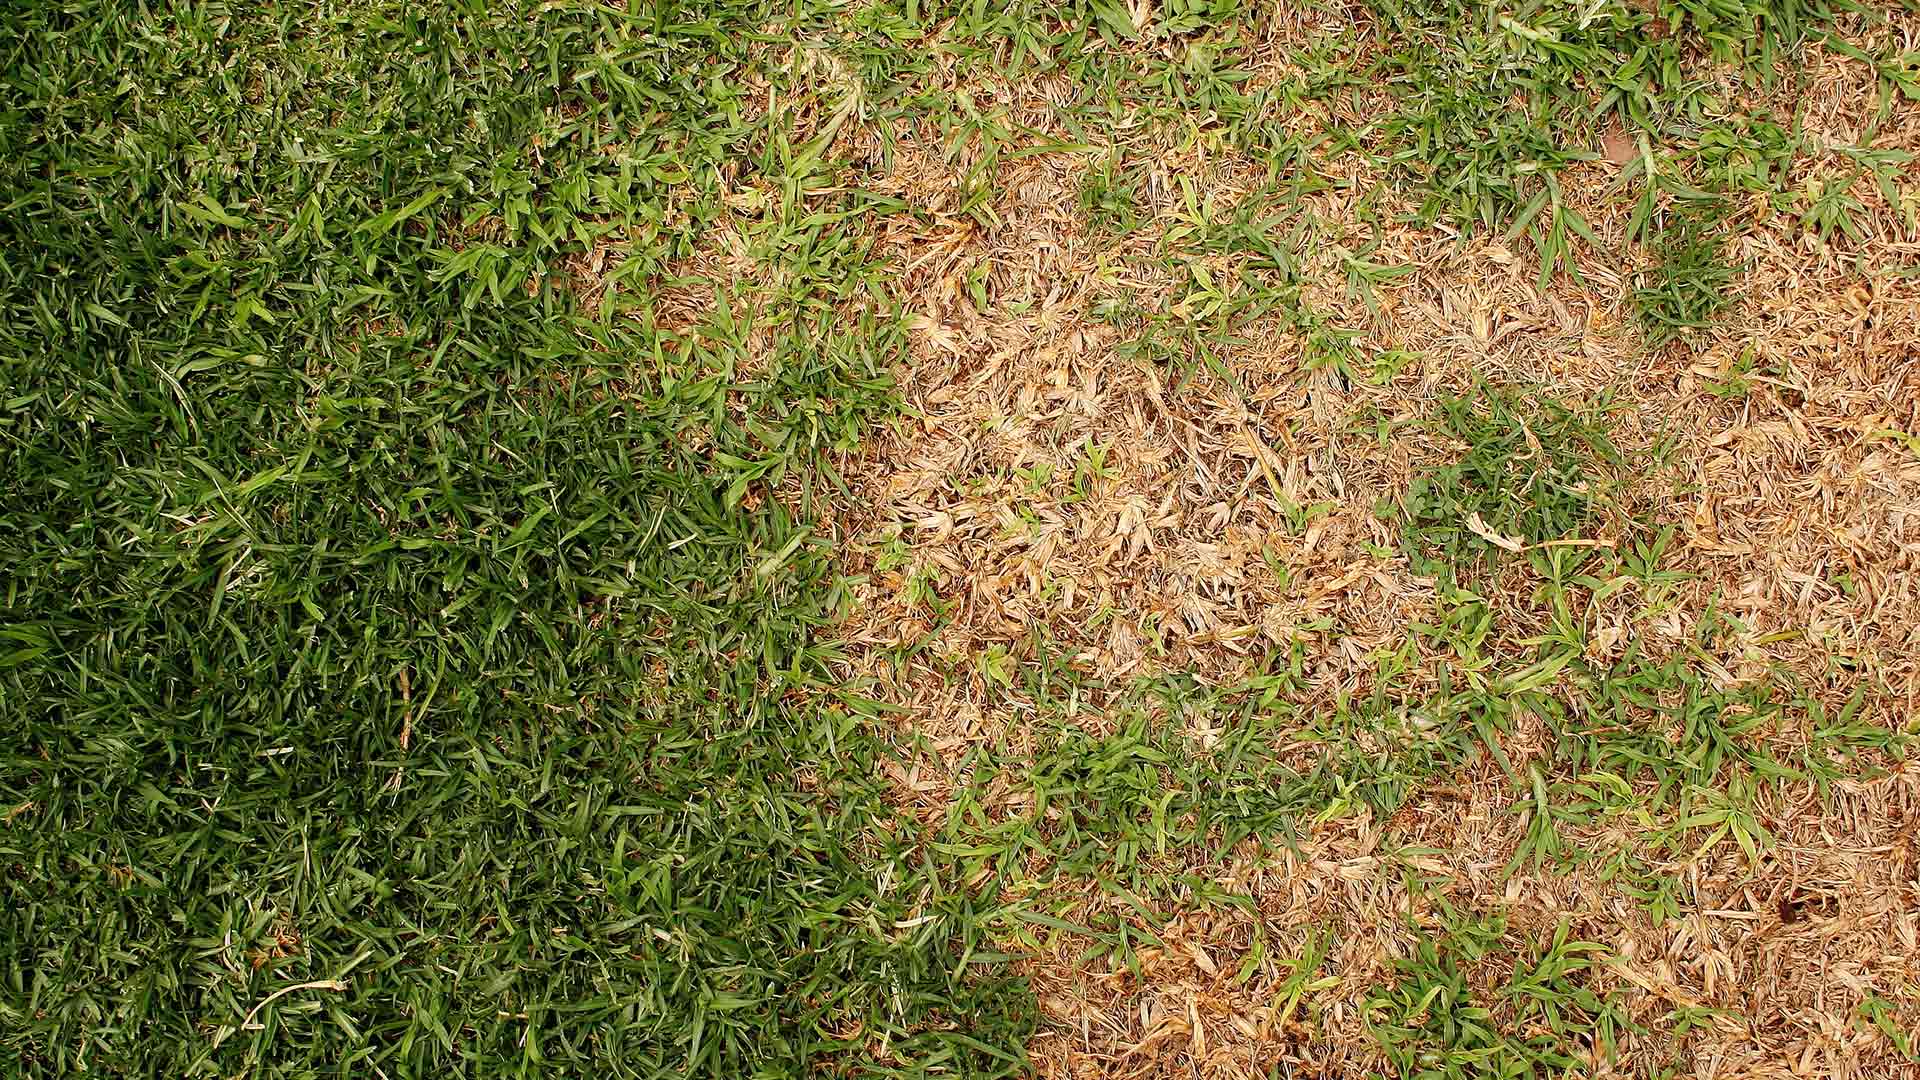 4 Lawn Diseases That Affect Lawns in Texas in the Summer & Fall